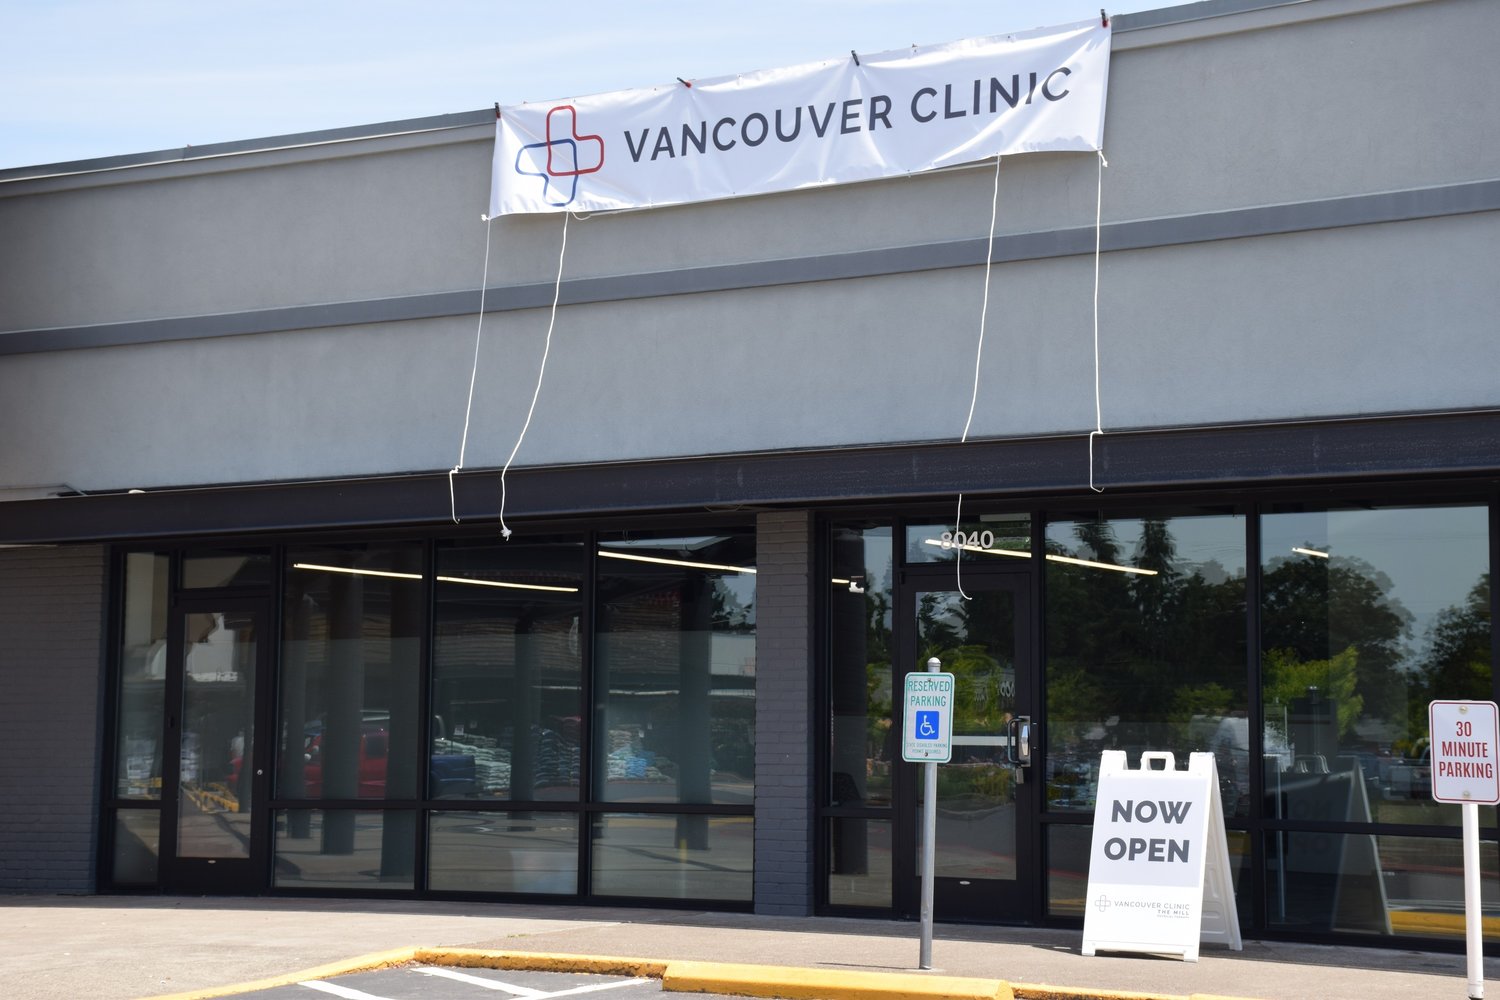 The Vancouver Clinic’s 87th Avenue Physical Therapy Center recently moved to a new location at 8040 E Mill Plain Blvd., Vancouver.